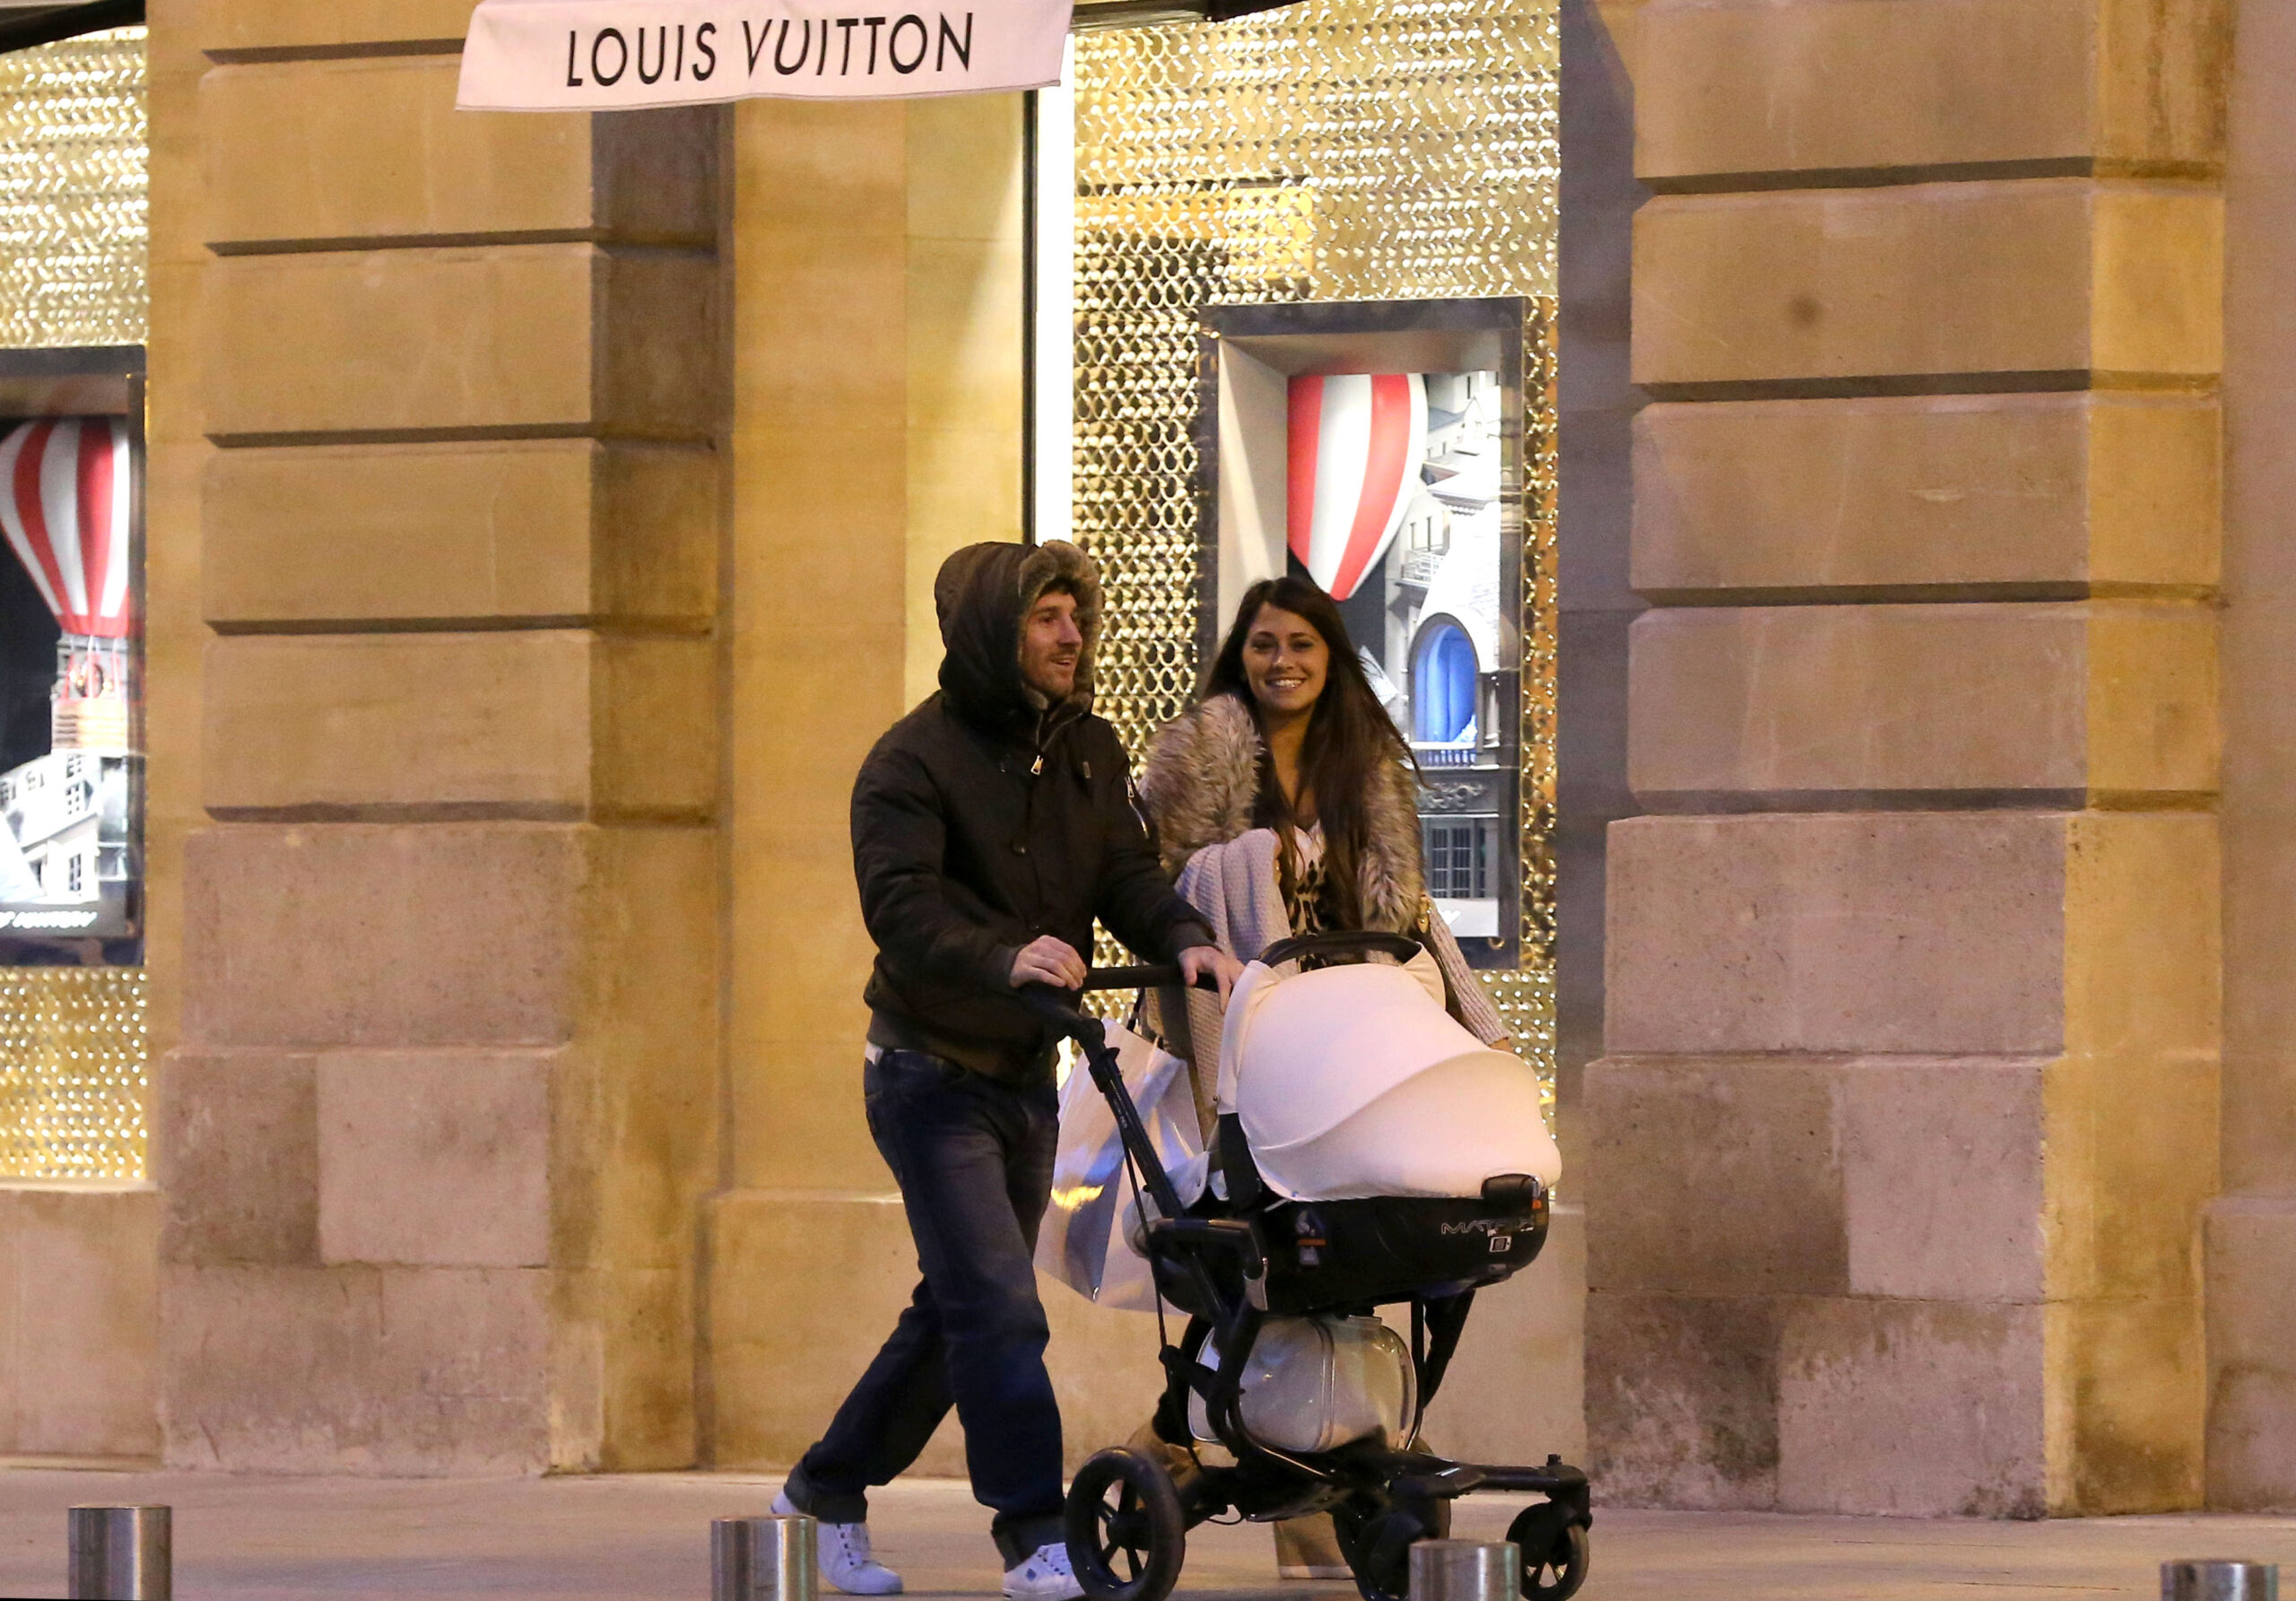 EXCLUSIVE - Argentina and Barcelona soccer player Lionel Messi and his girlfriend Antonella Rocuzzo are spotted strolling with their baby son Thiago in Paris, France on February 11, 2013. Photo by ABACAPRESS.COM